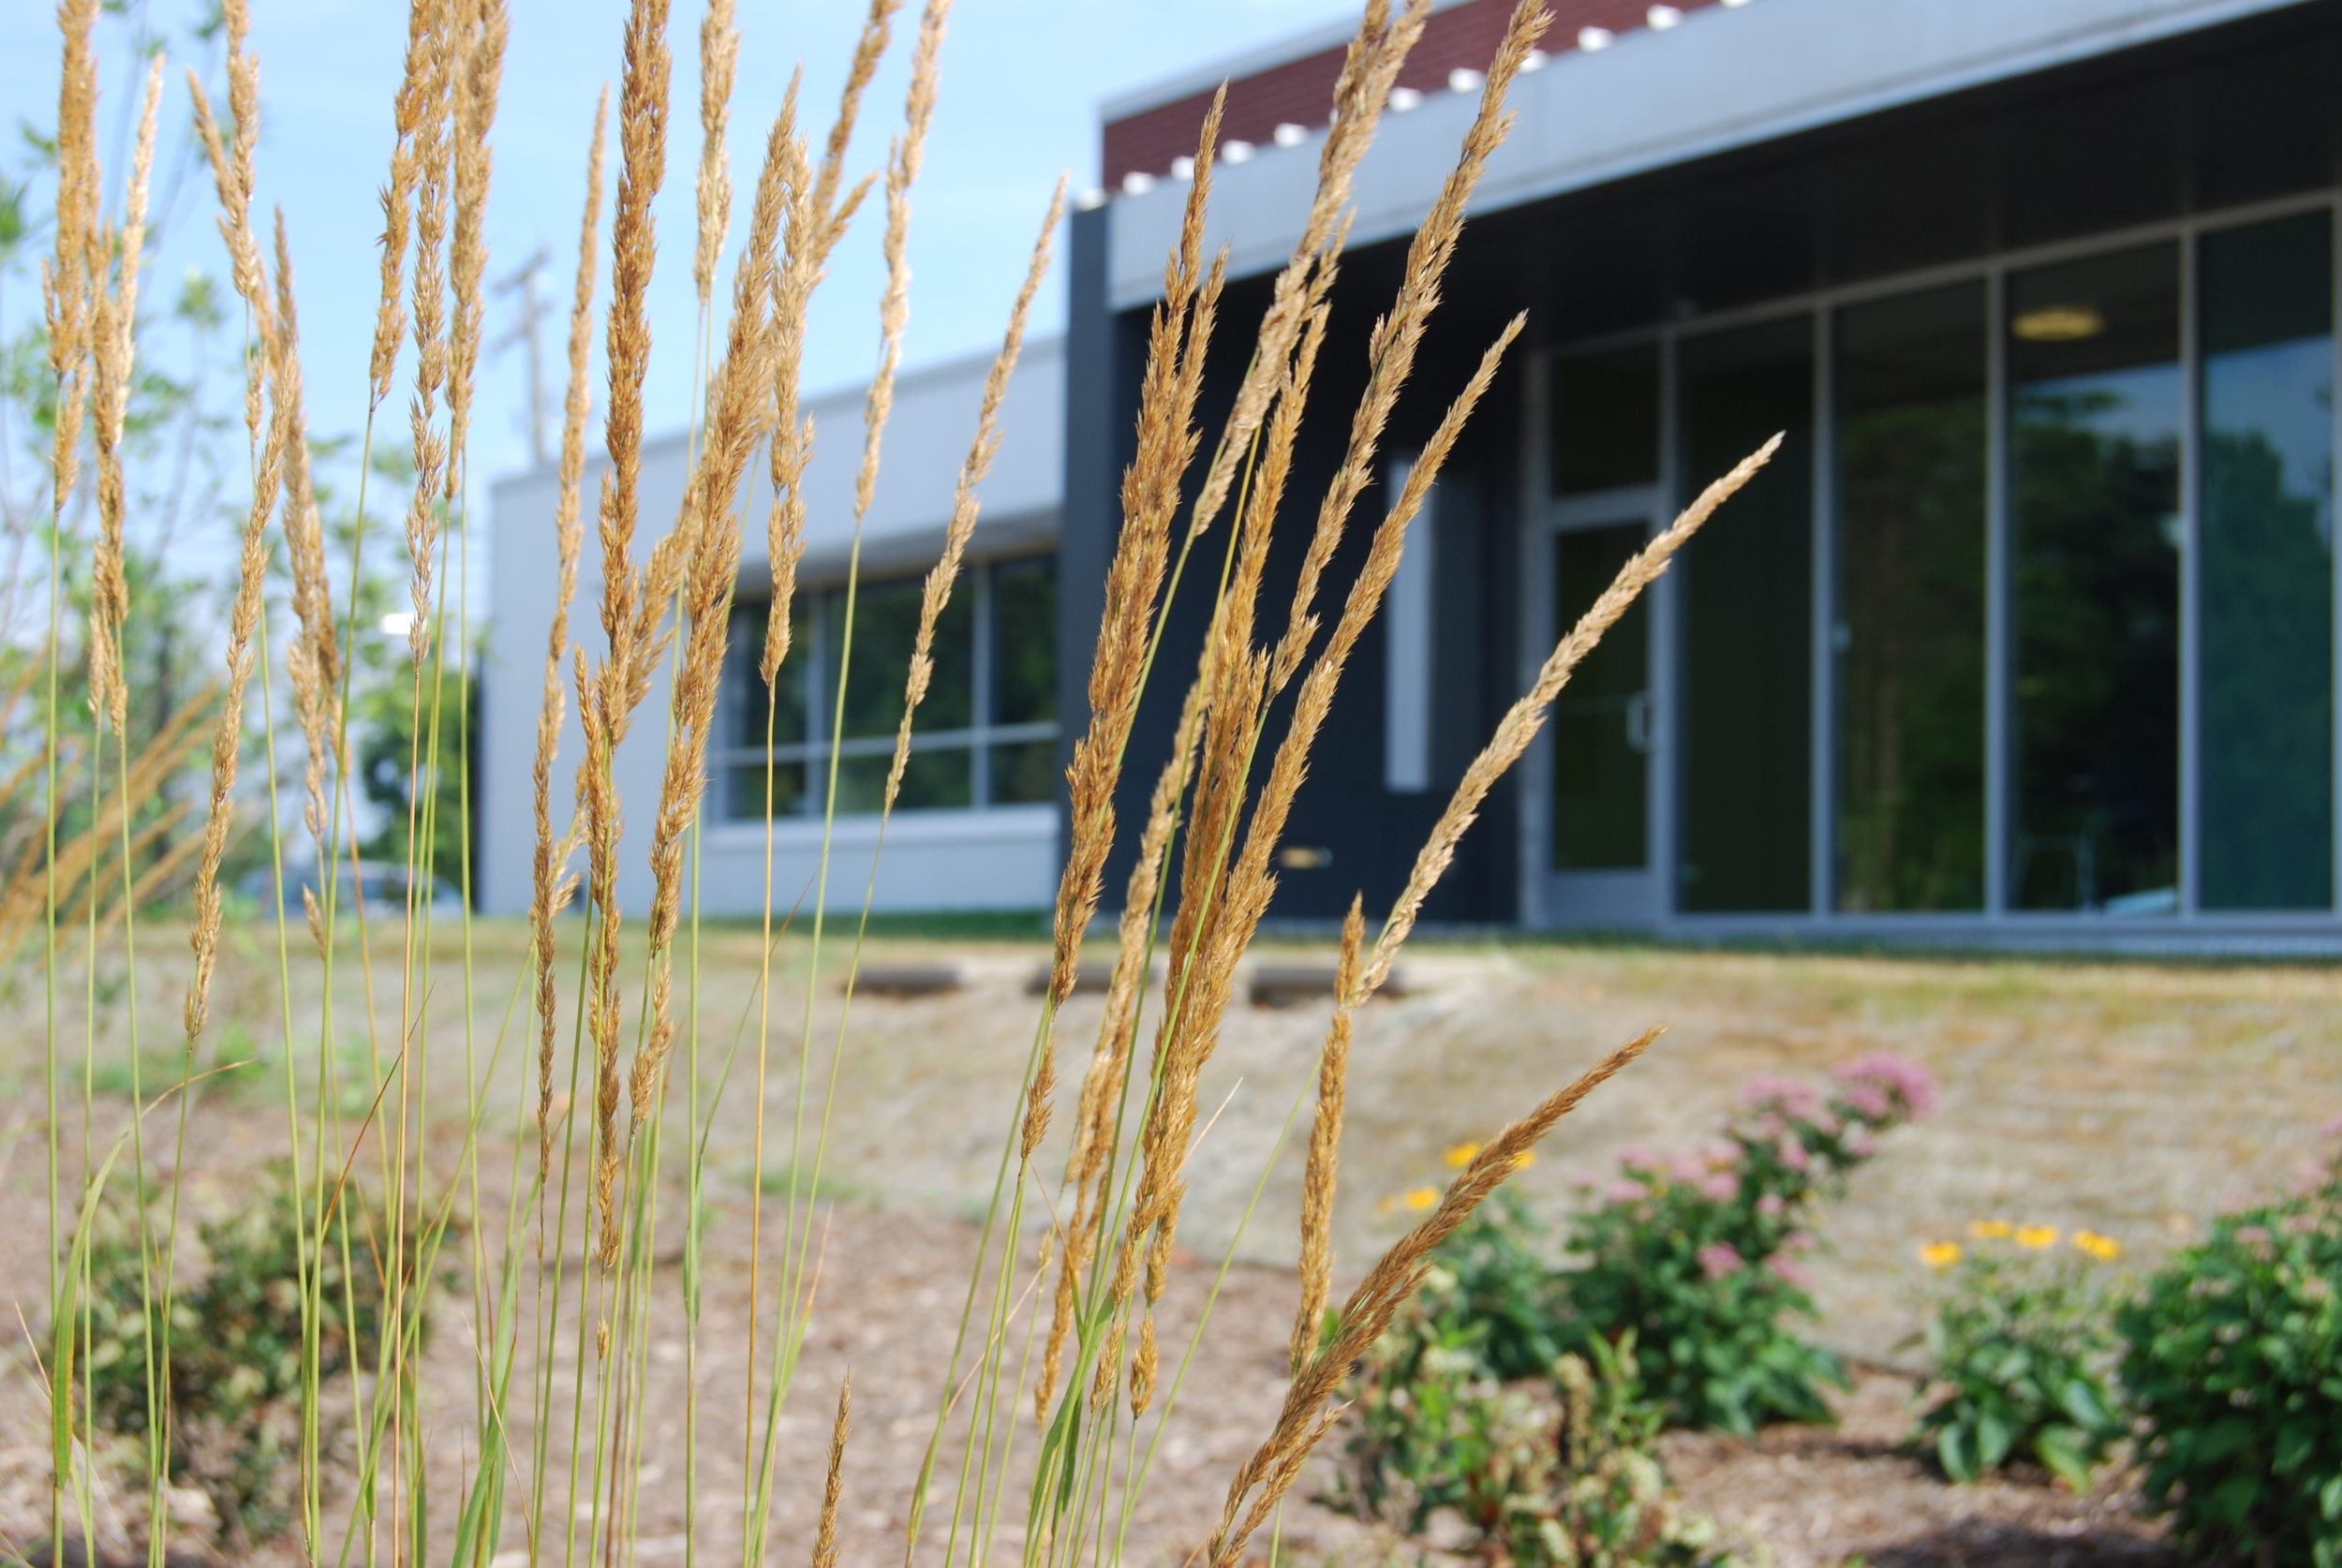 Employees enjoy ready access to natural spaces throughout the complex.